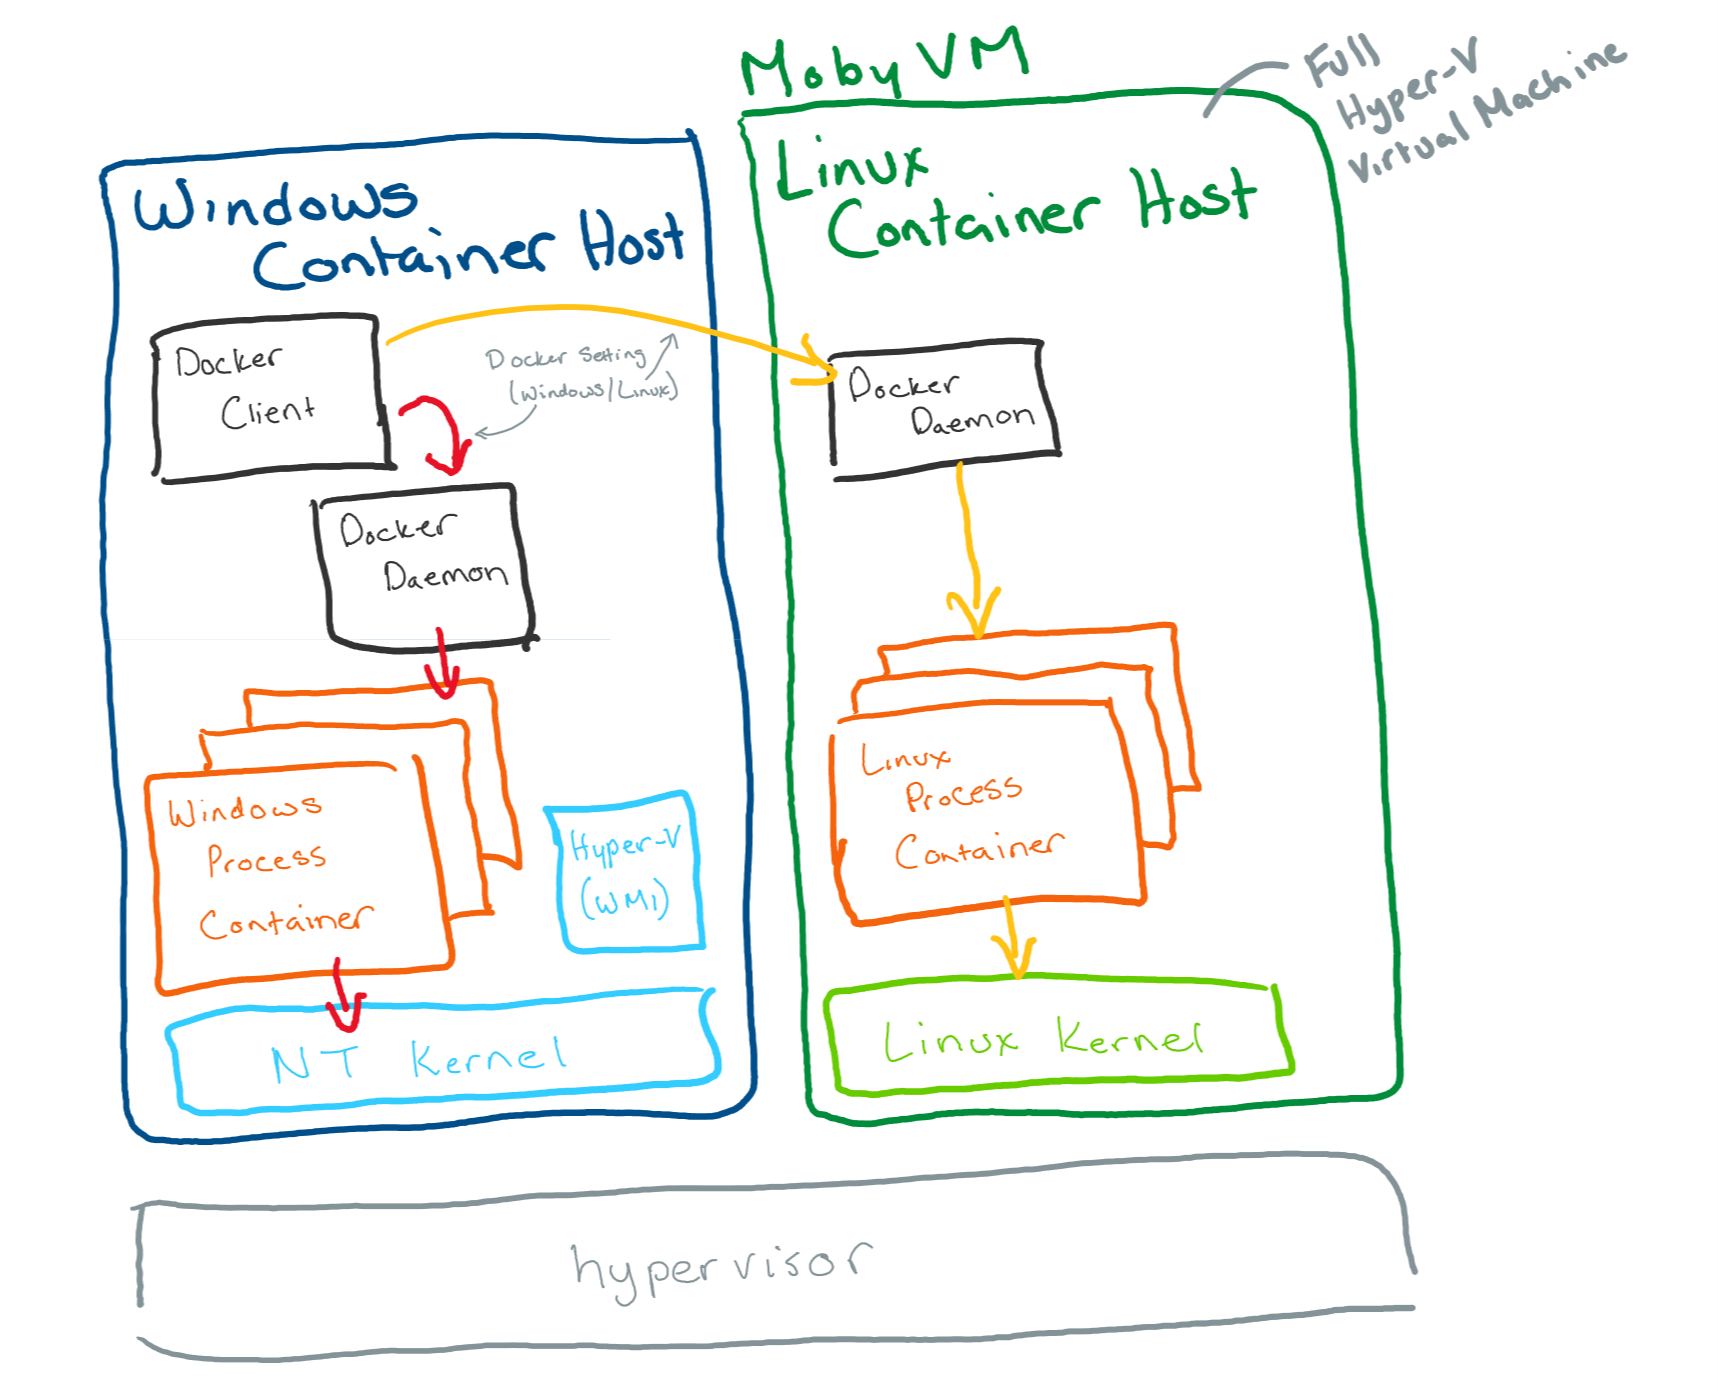 Moby VM as the container host